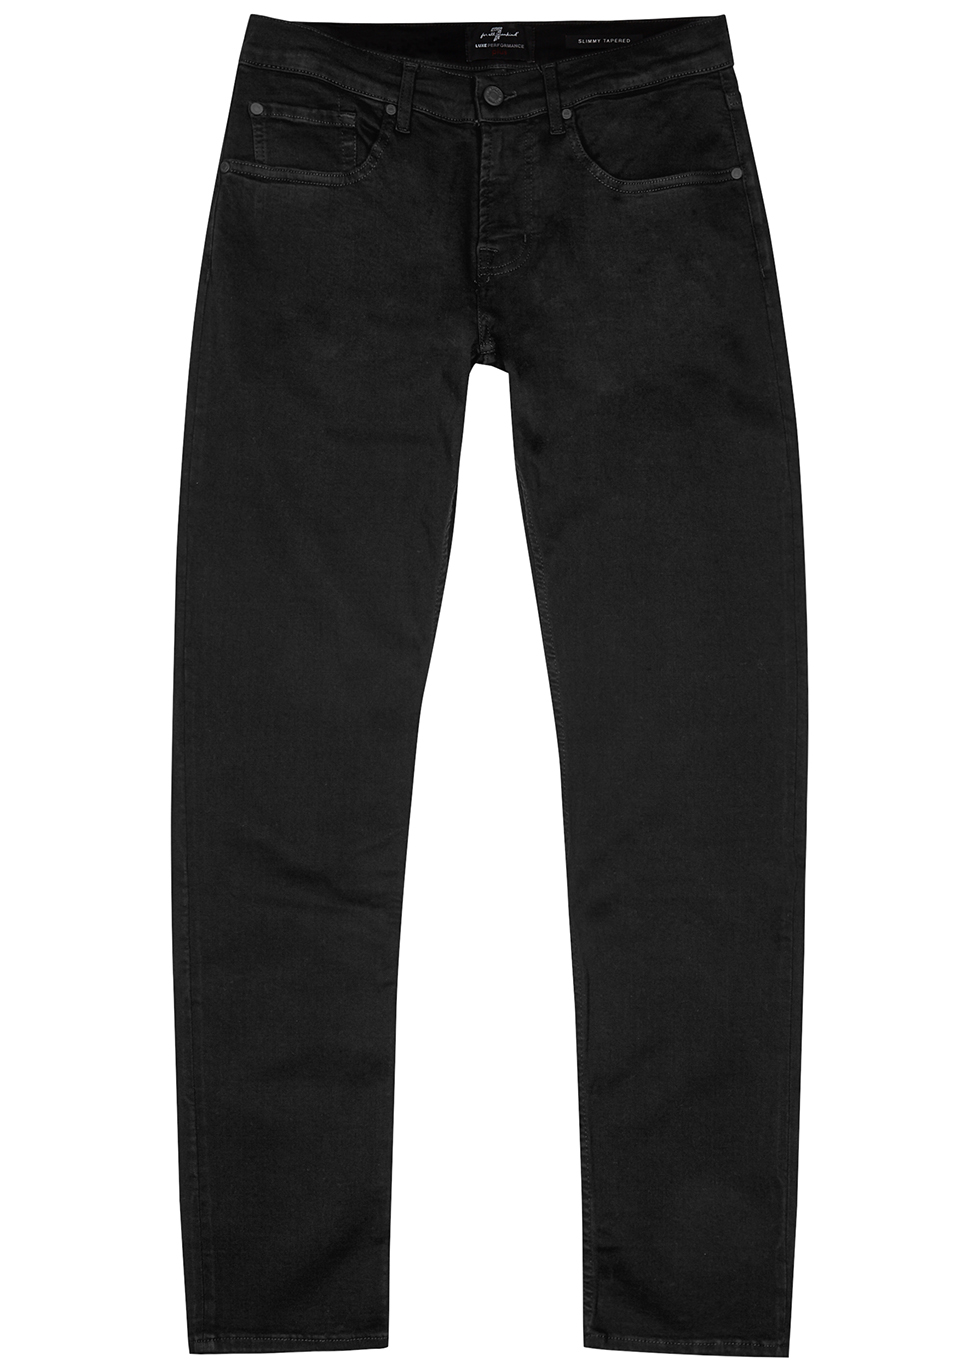 Slimmy Tapered Luxe Performance Harvey Nichols Men Clothing Jeans Tapered Jeans jeans 